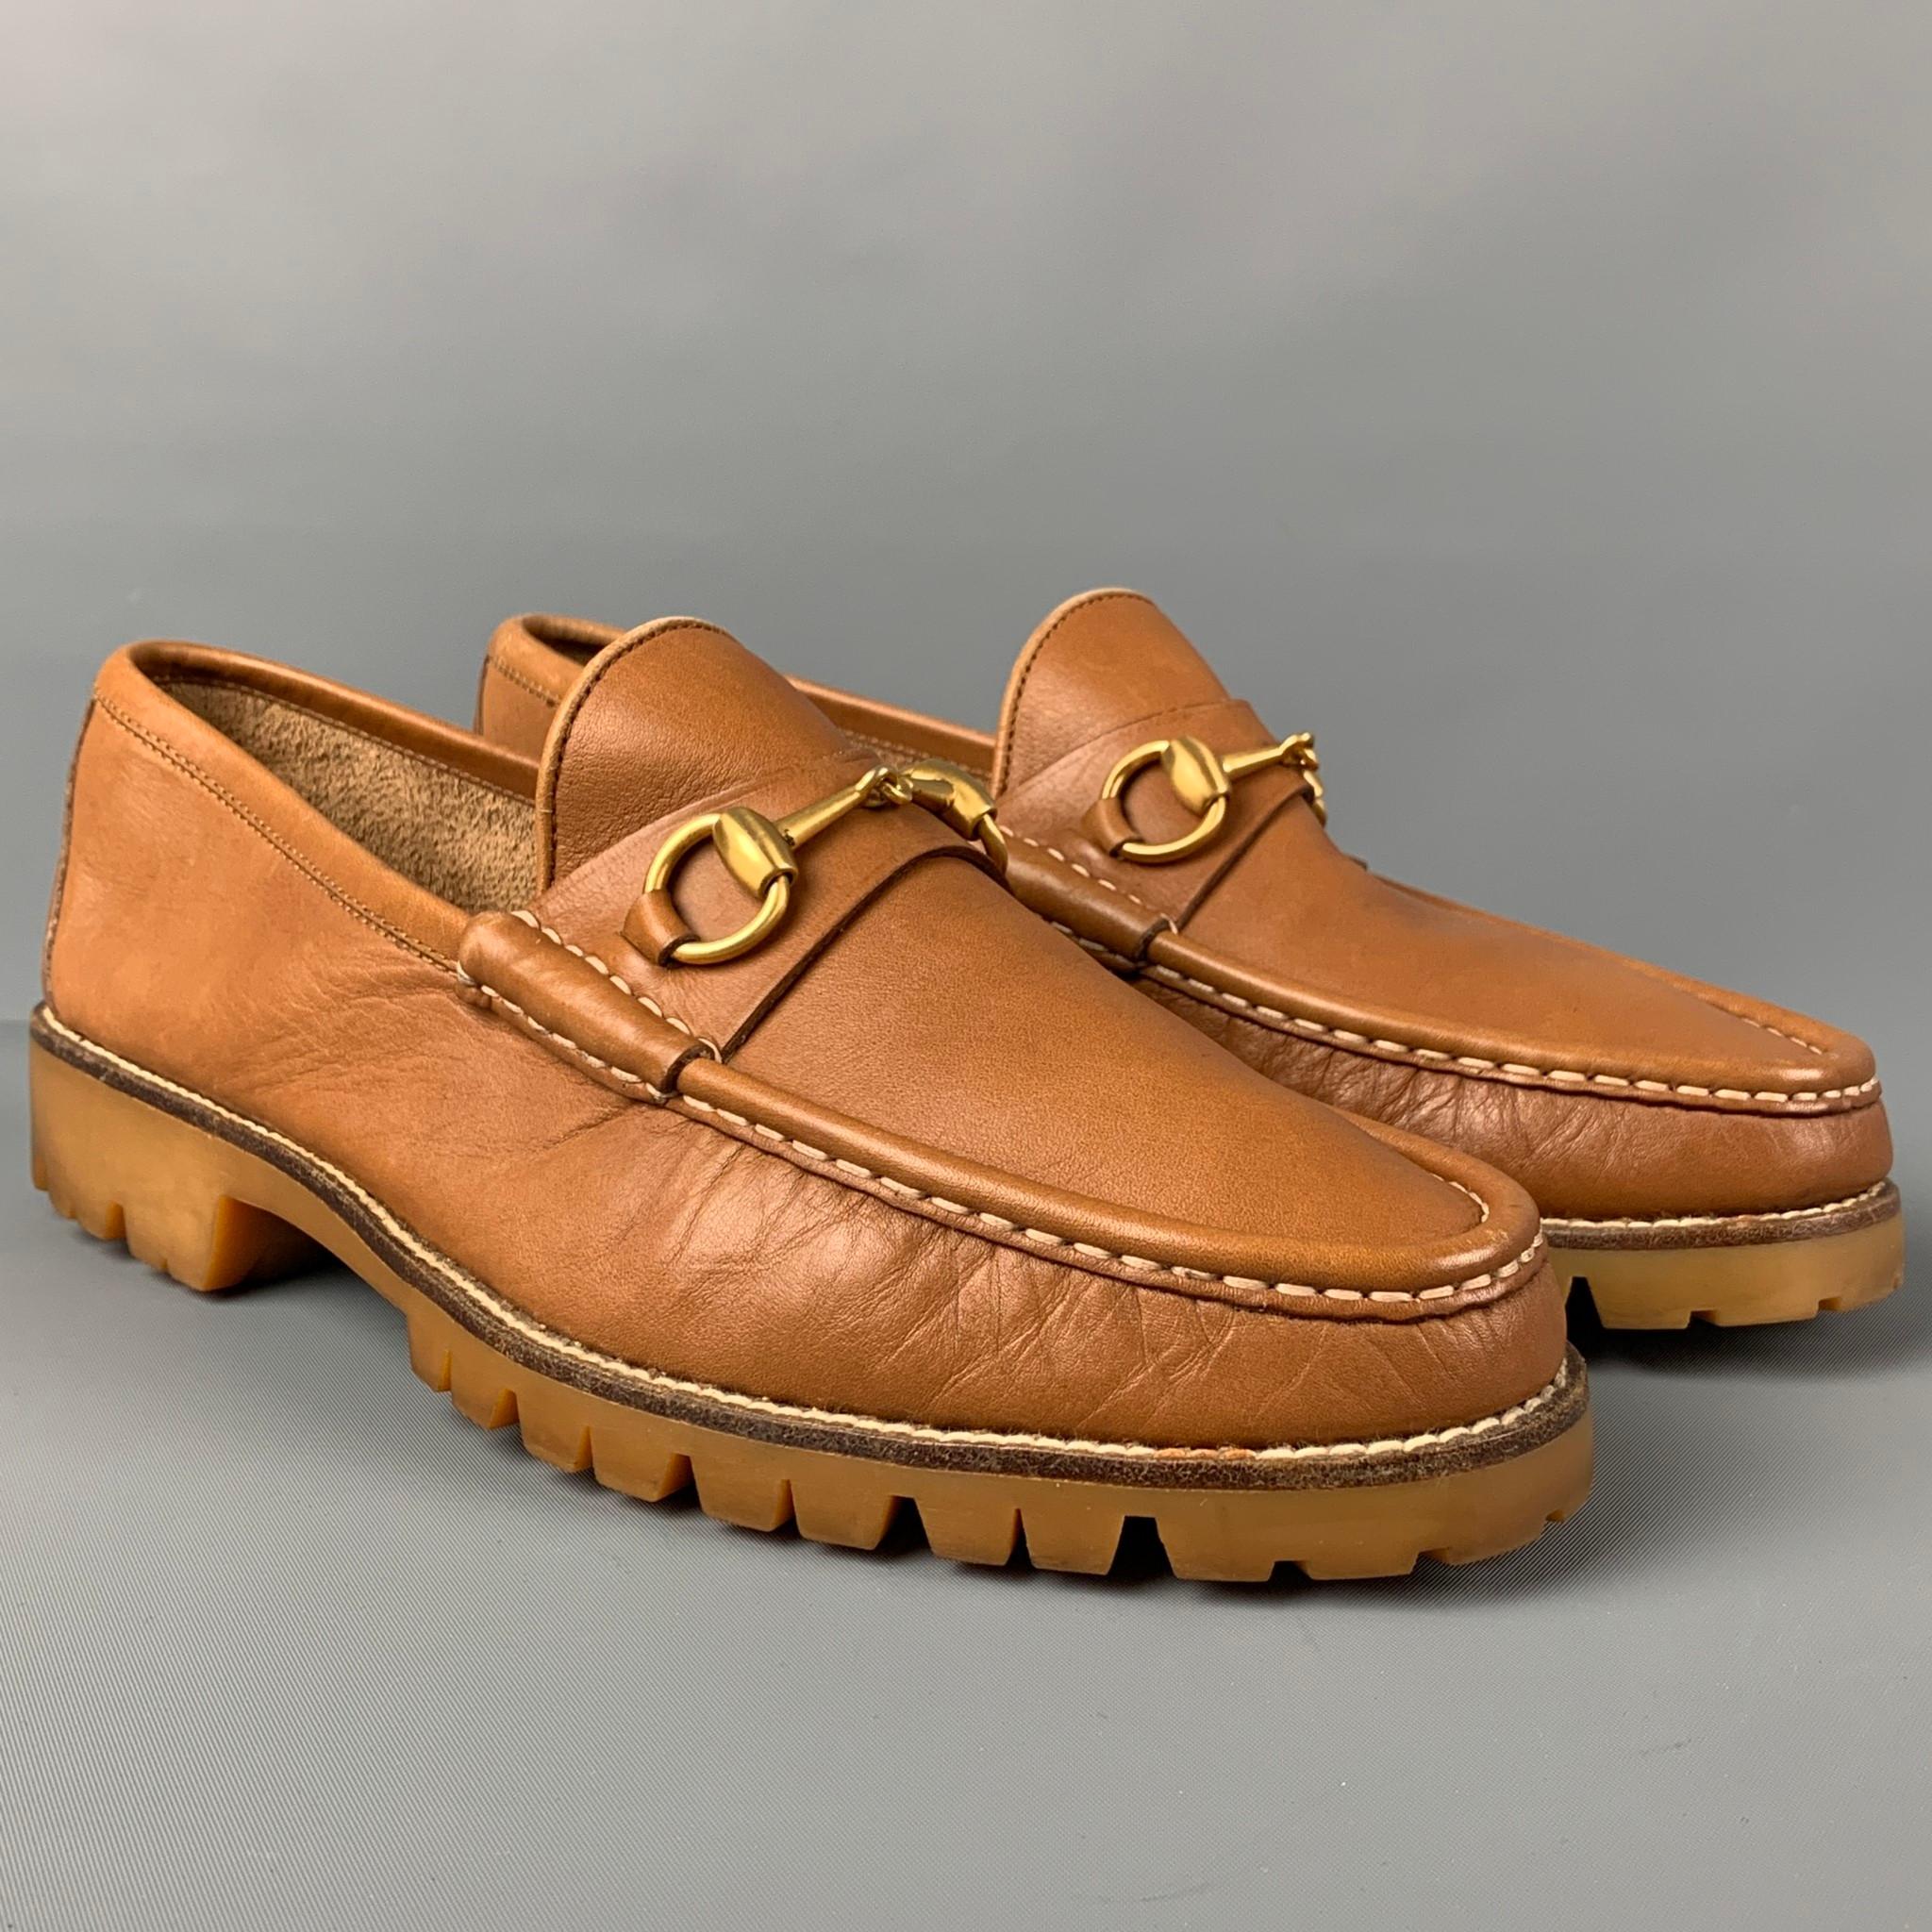 GUCCI loafers comes in a tan leather featuring a gold tone horsebit design and a slip on style. Made in Italy. 

Very Good Pre-Owned Condition.
Marked: 8 D

Outsole:11 in. x 4 in. 